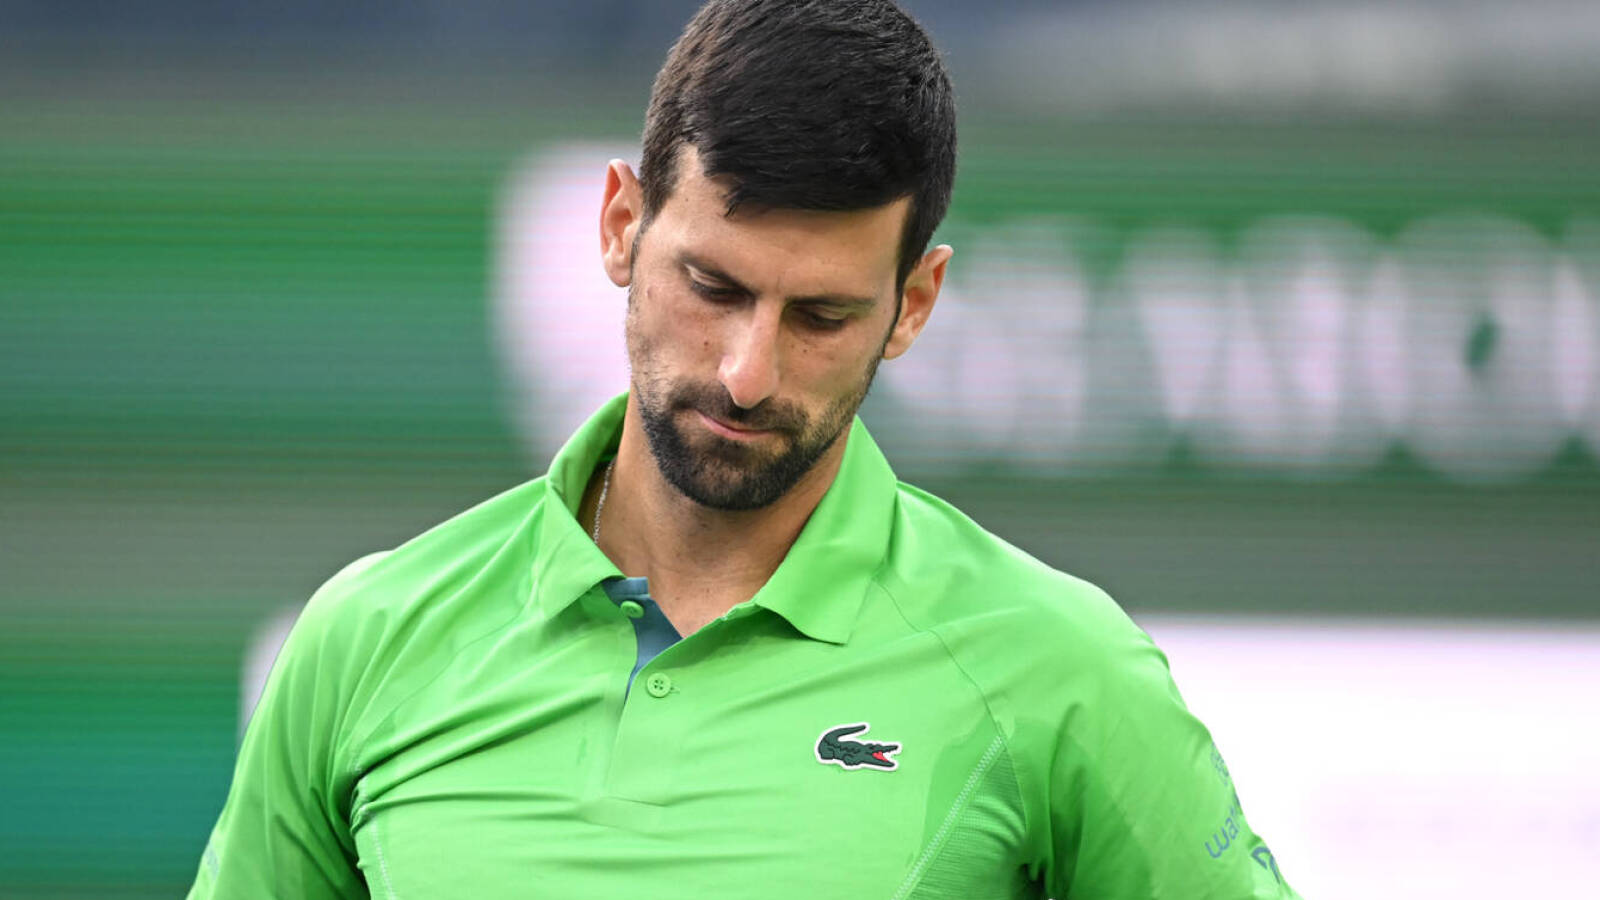 Novak Djokovic thinks water bottle incident may have played role in surprising loss